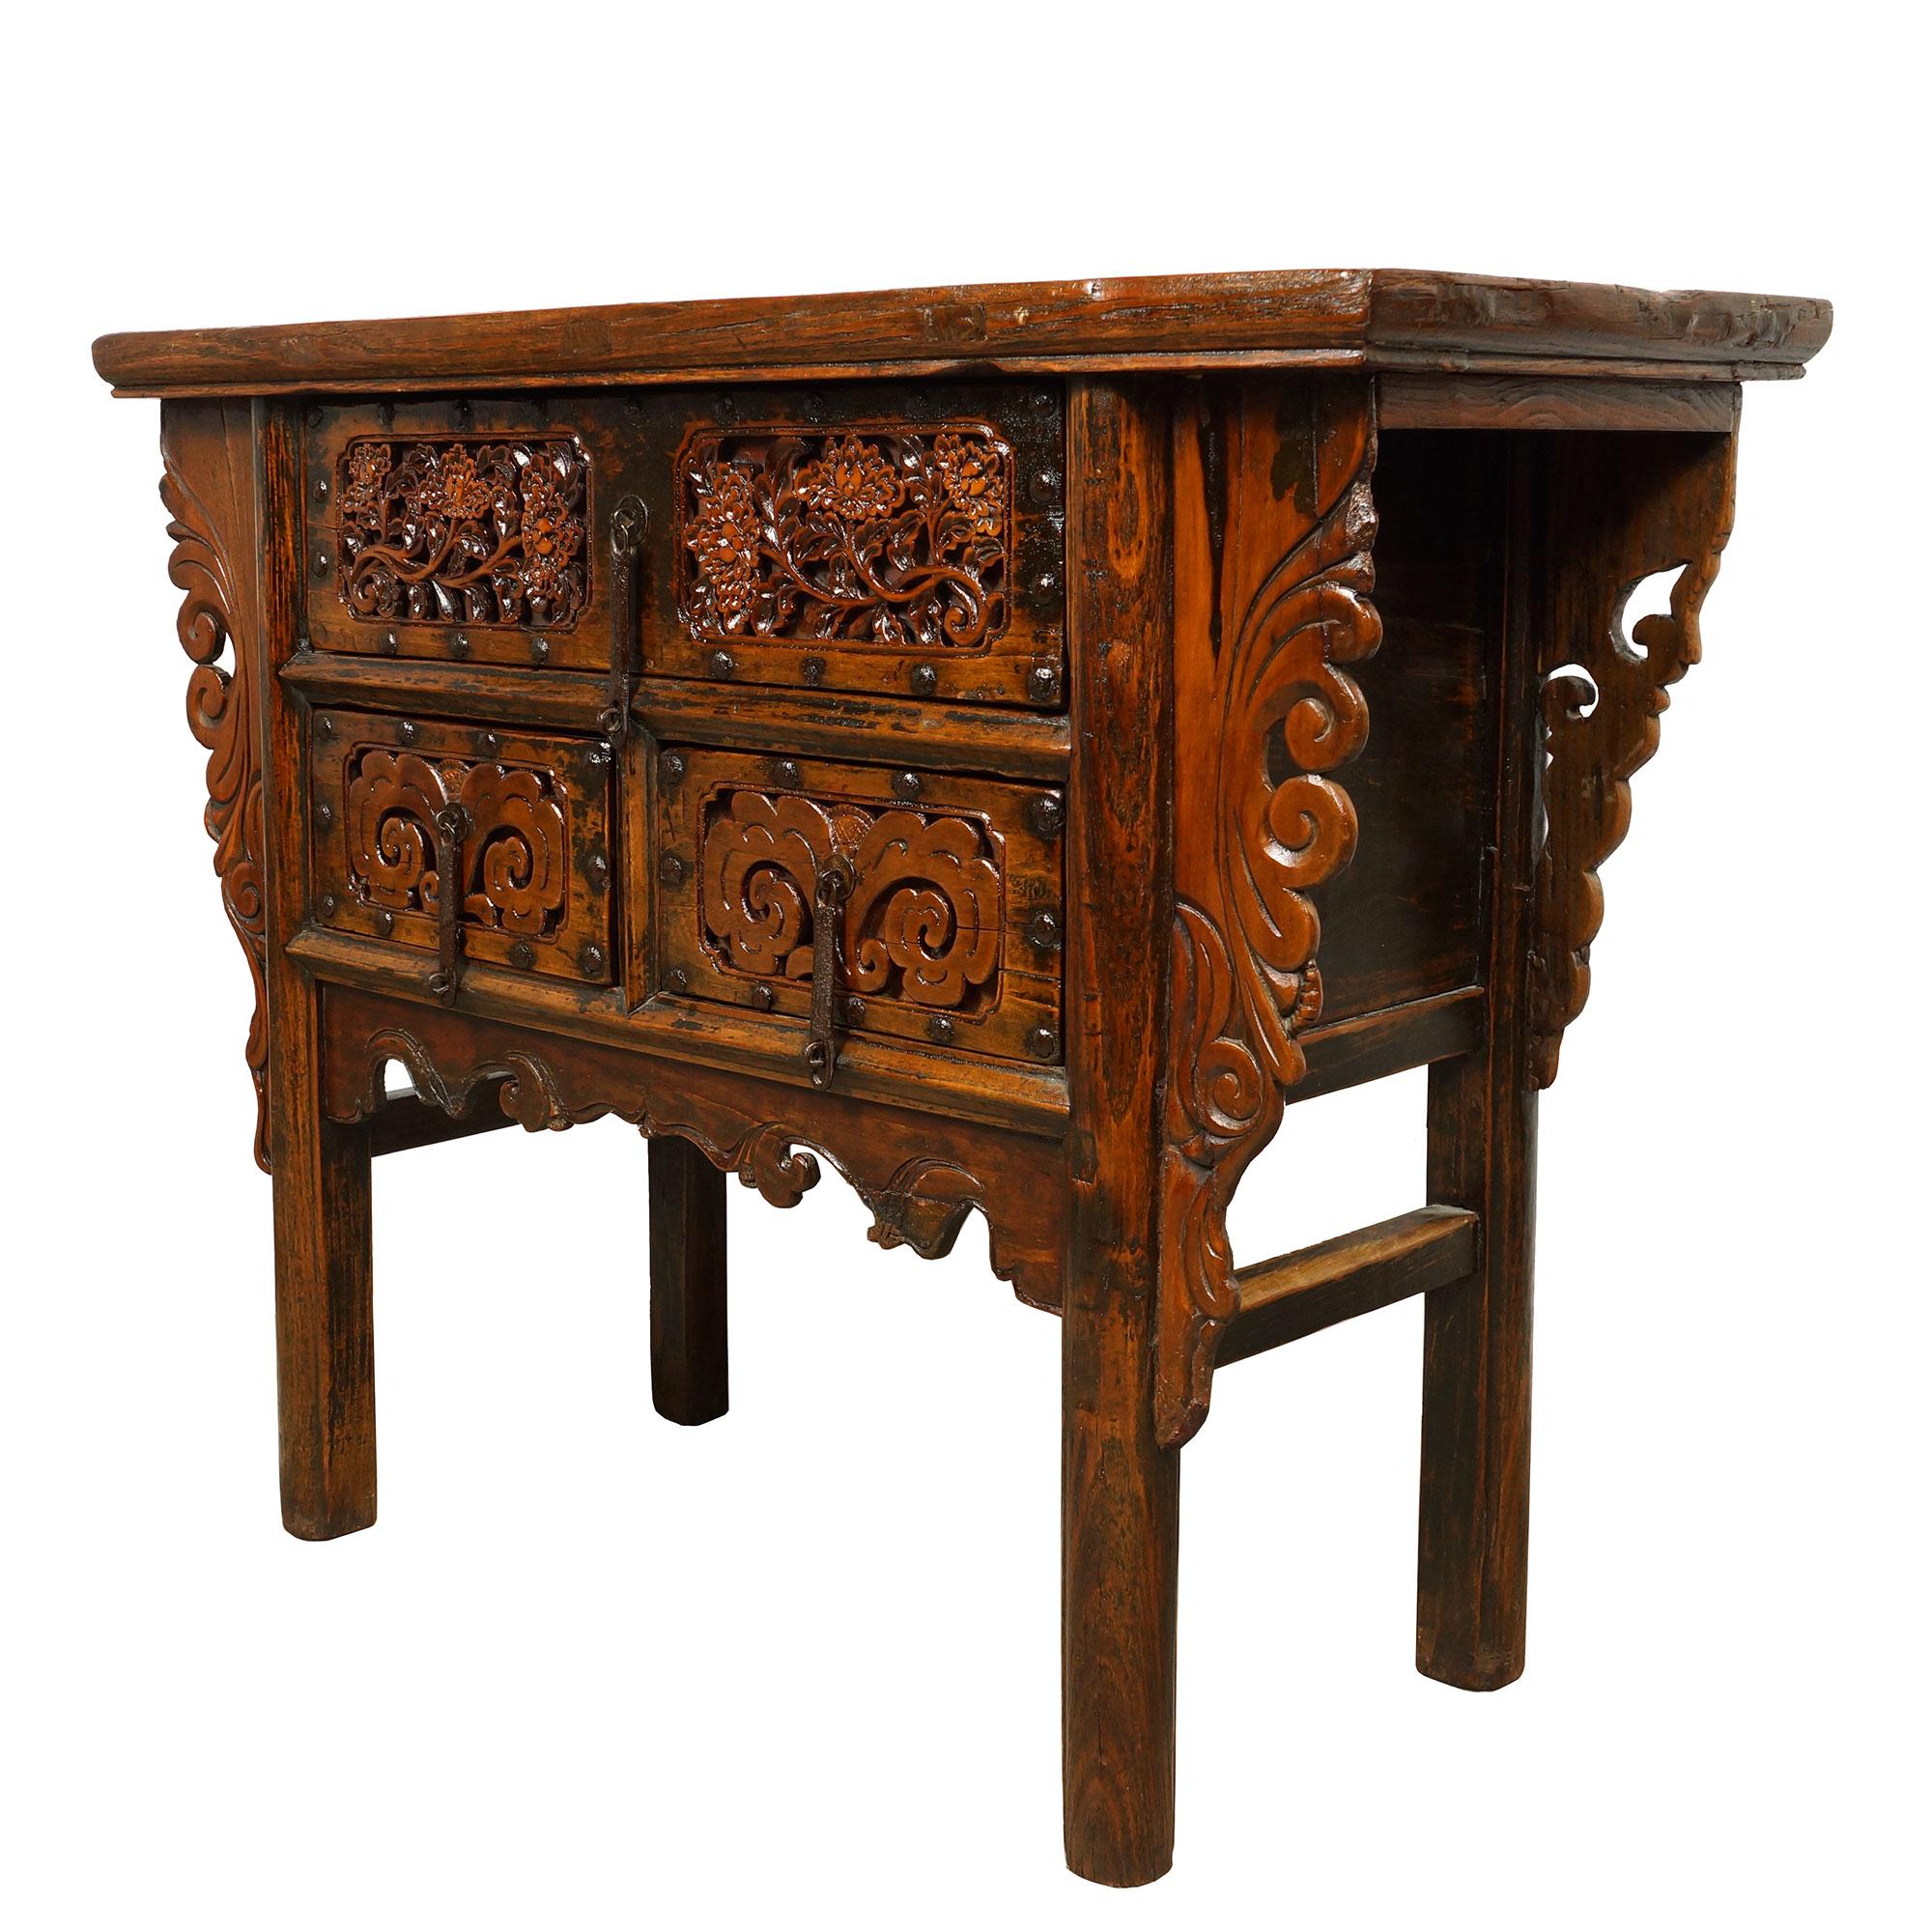 This beautiful antique carved Shan Xi console table has beautiful traditional detailed massive deep/raised carving works on the front drawer panels and legs. This console table features 1 large drawer on the top and 2 smaller drawers underneath. All